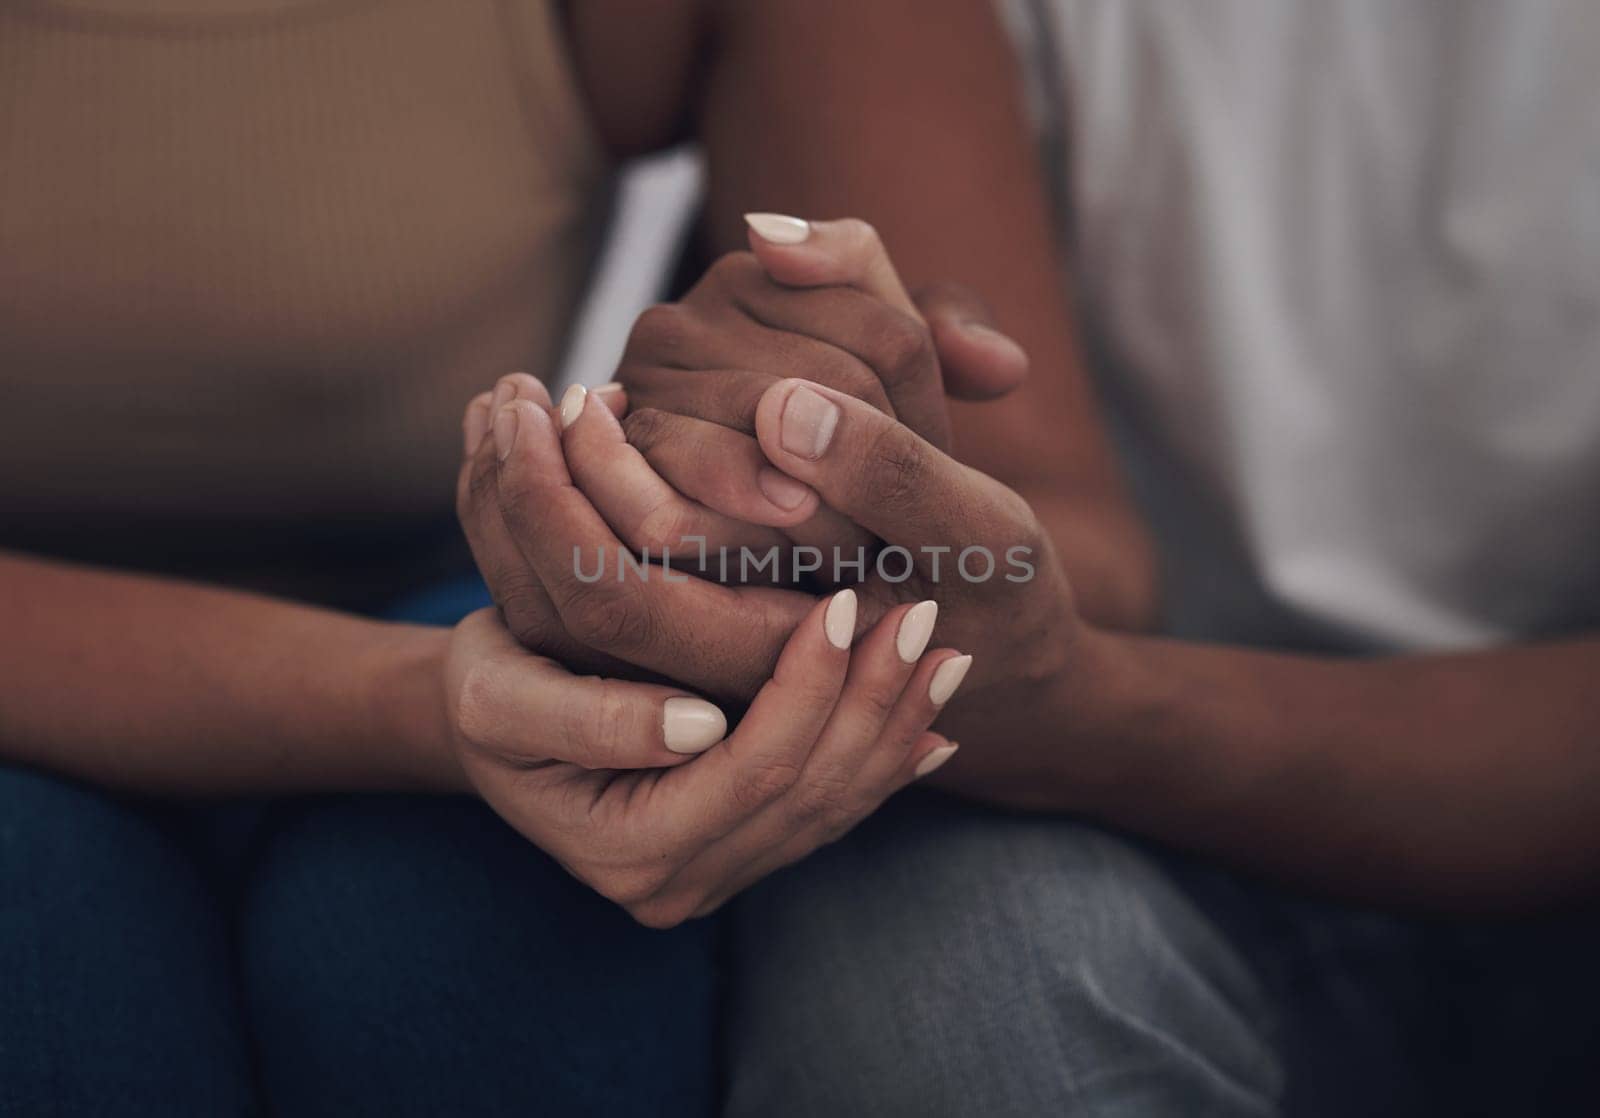 Couple, love and holding hands for trust, care and solidarity or romance with studio background. Compassion, partnership and relationship for people, hope and support for affection and intimacy.